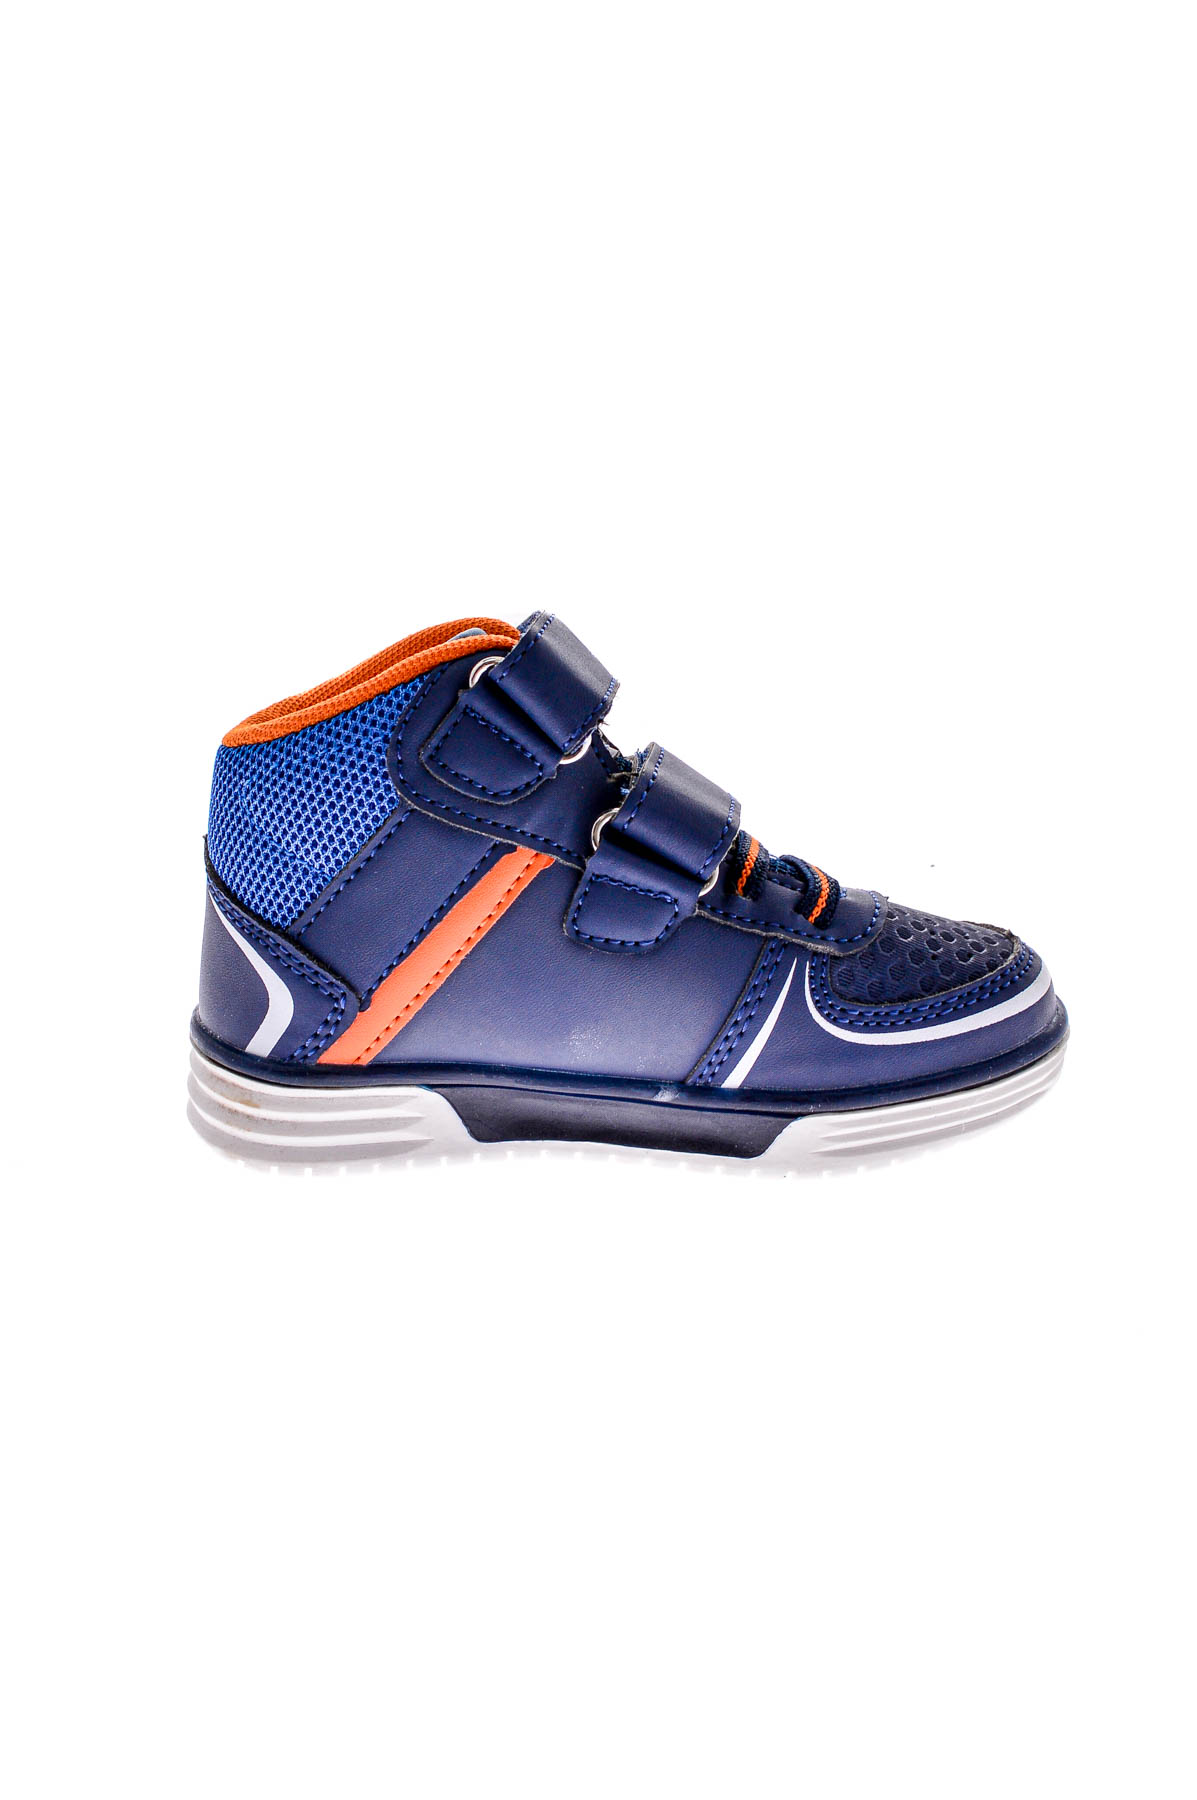 Kids' Shoes - SPACE JAM - 2